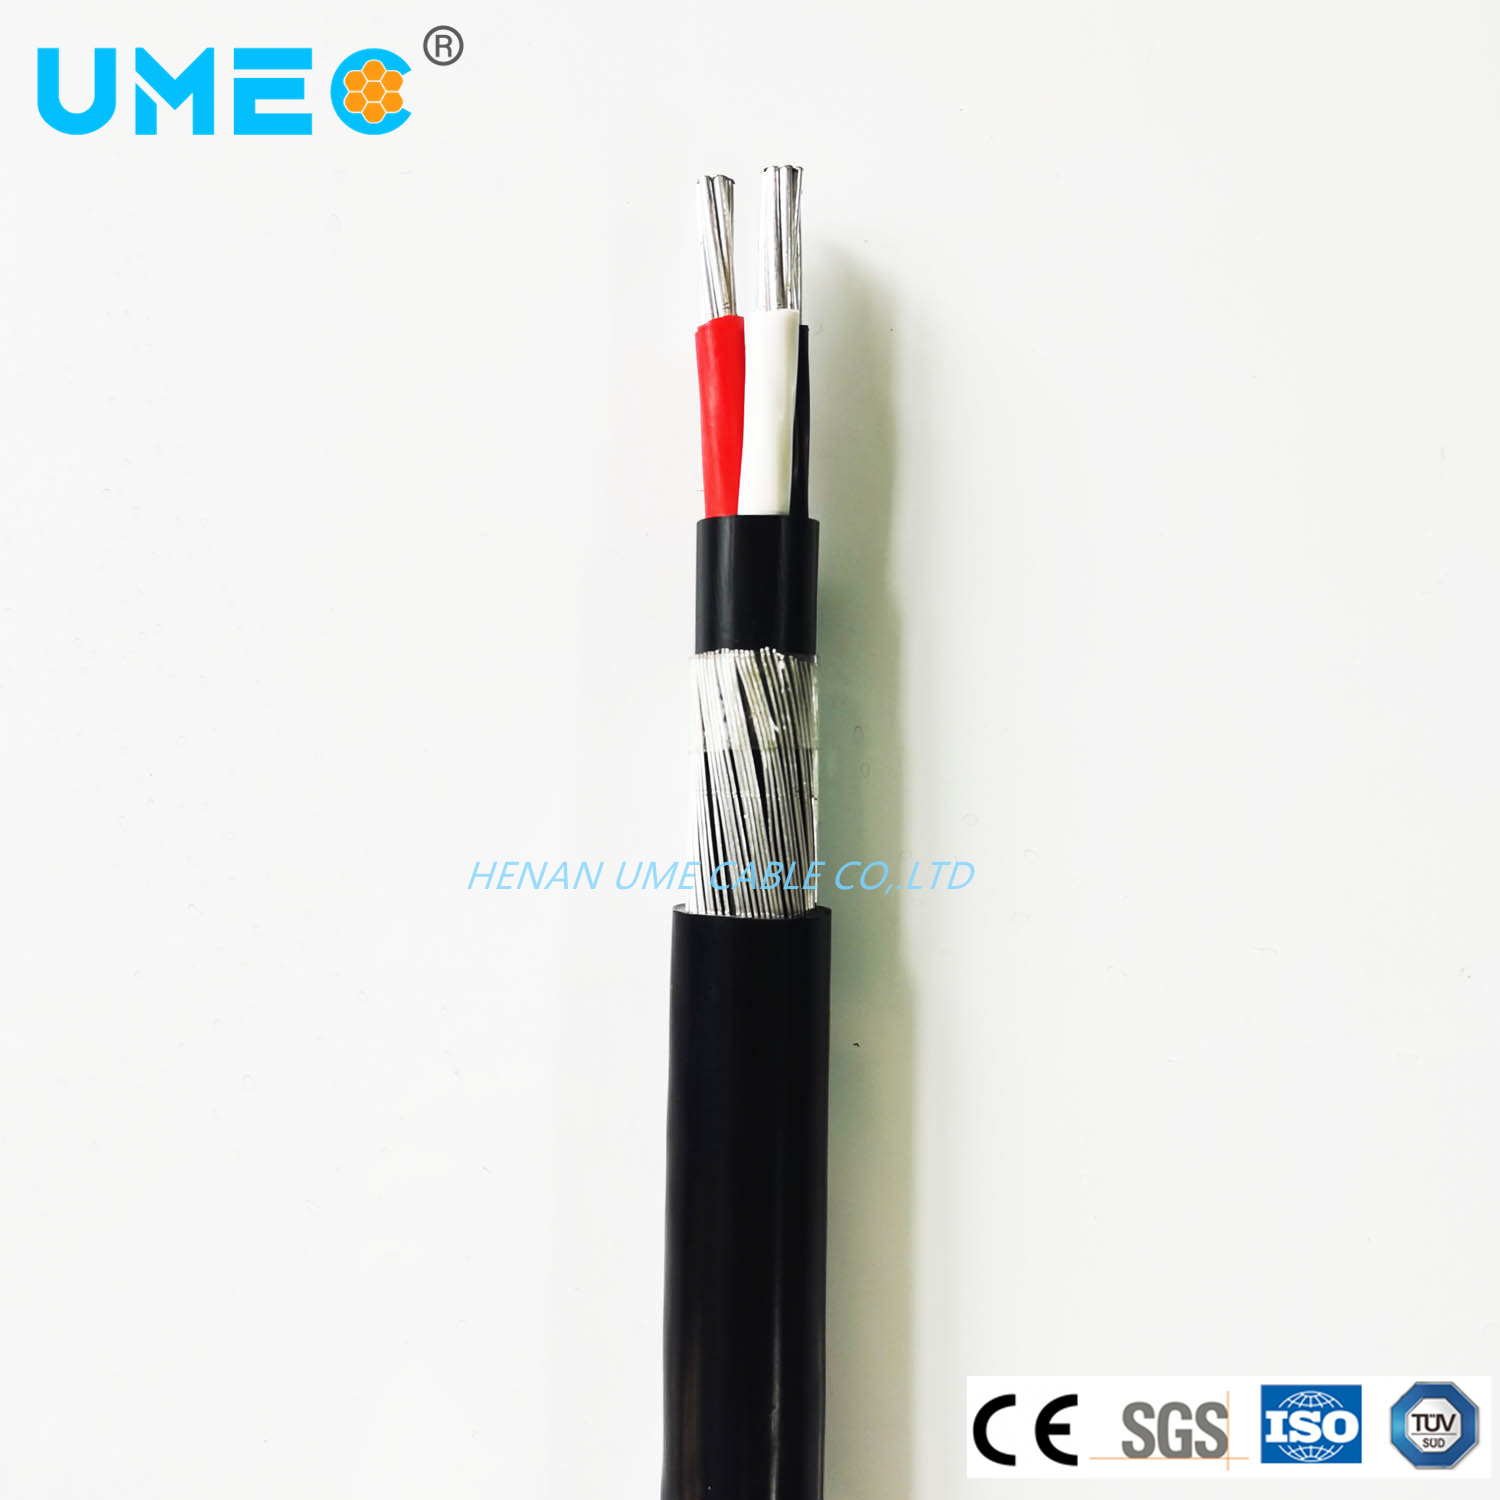 2X8 / 3X8 AWG PVC Insulated Concentric Cable